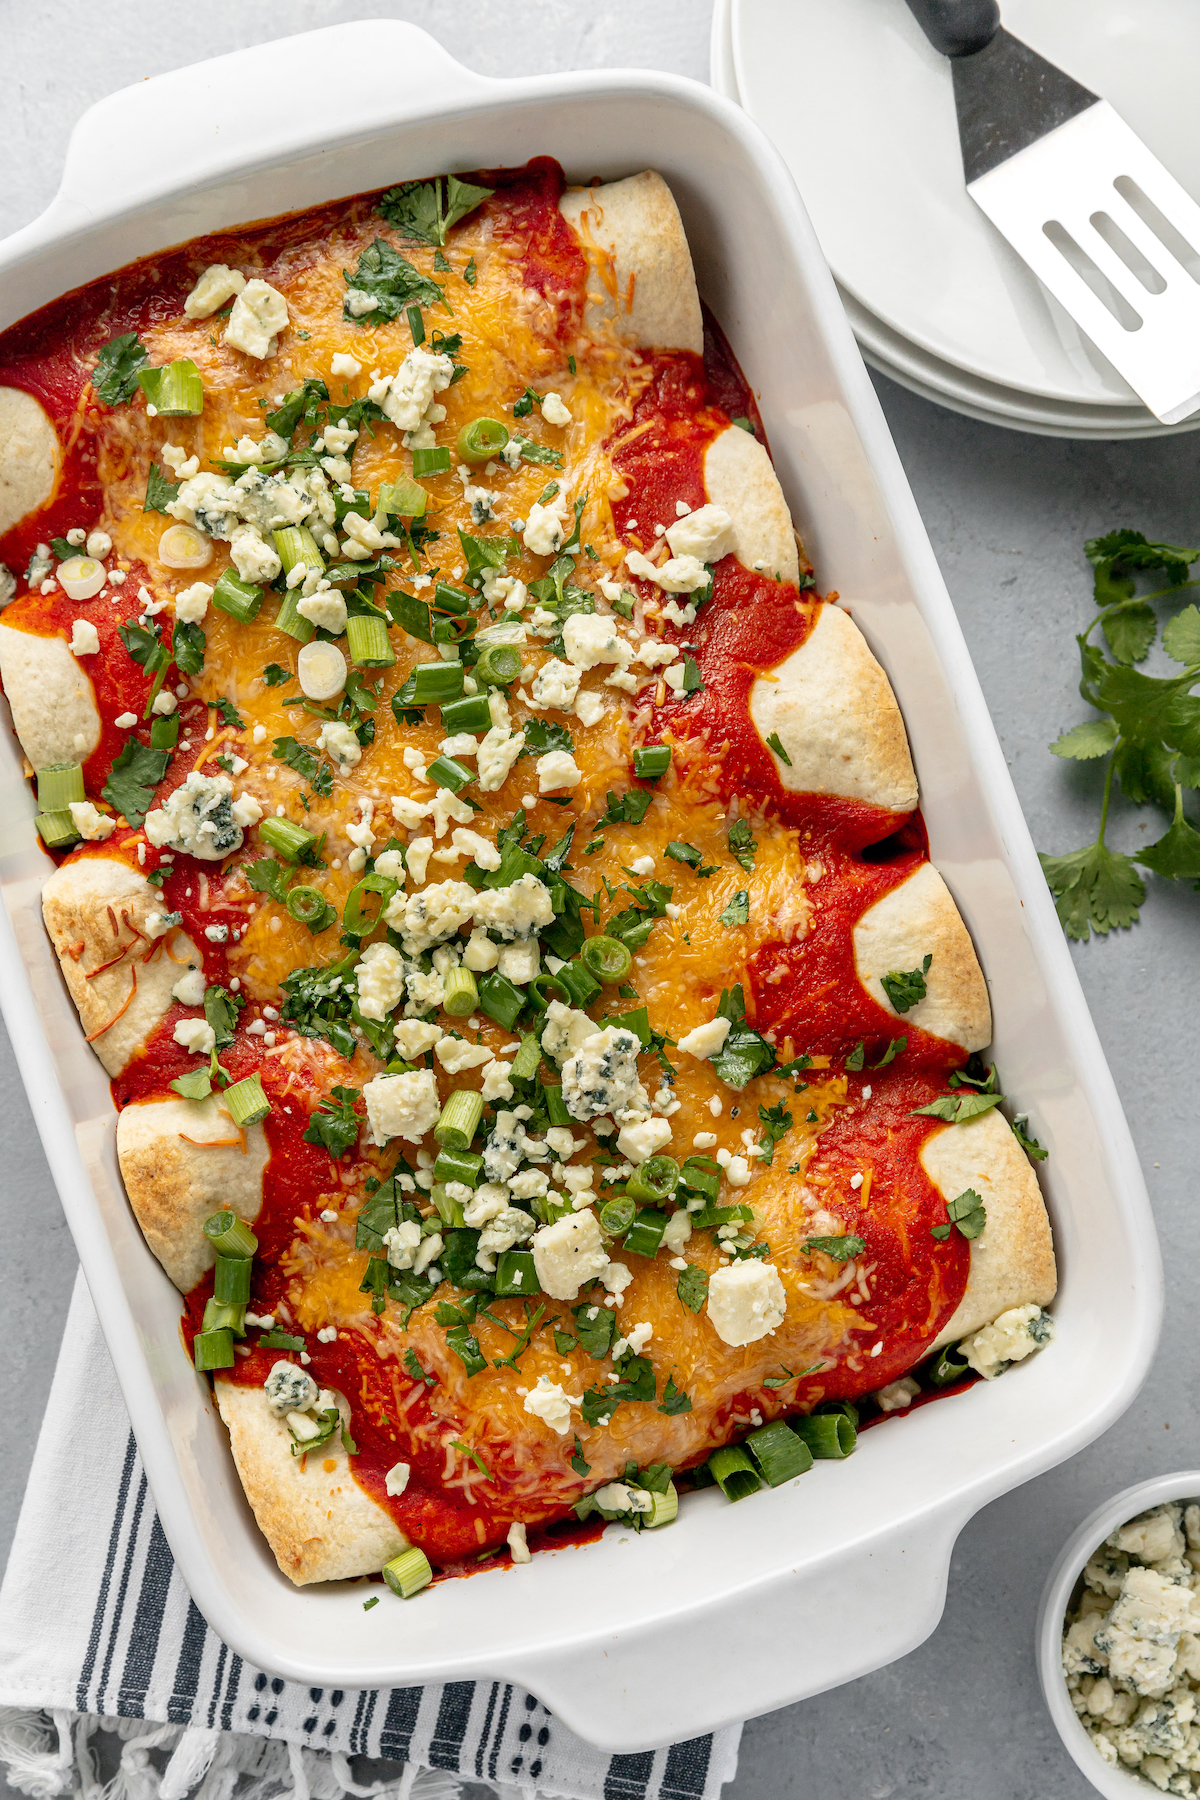 Baked enchiladas topped with bleu cheese and green onions.